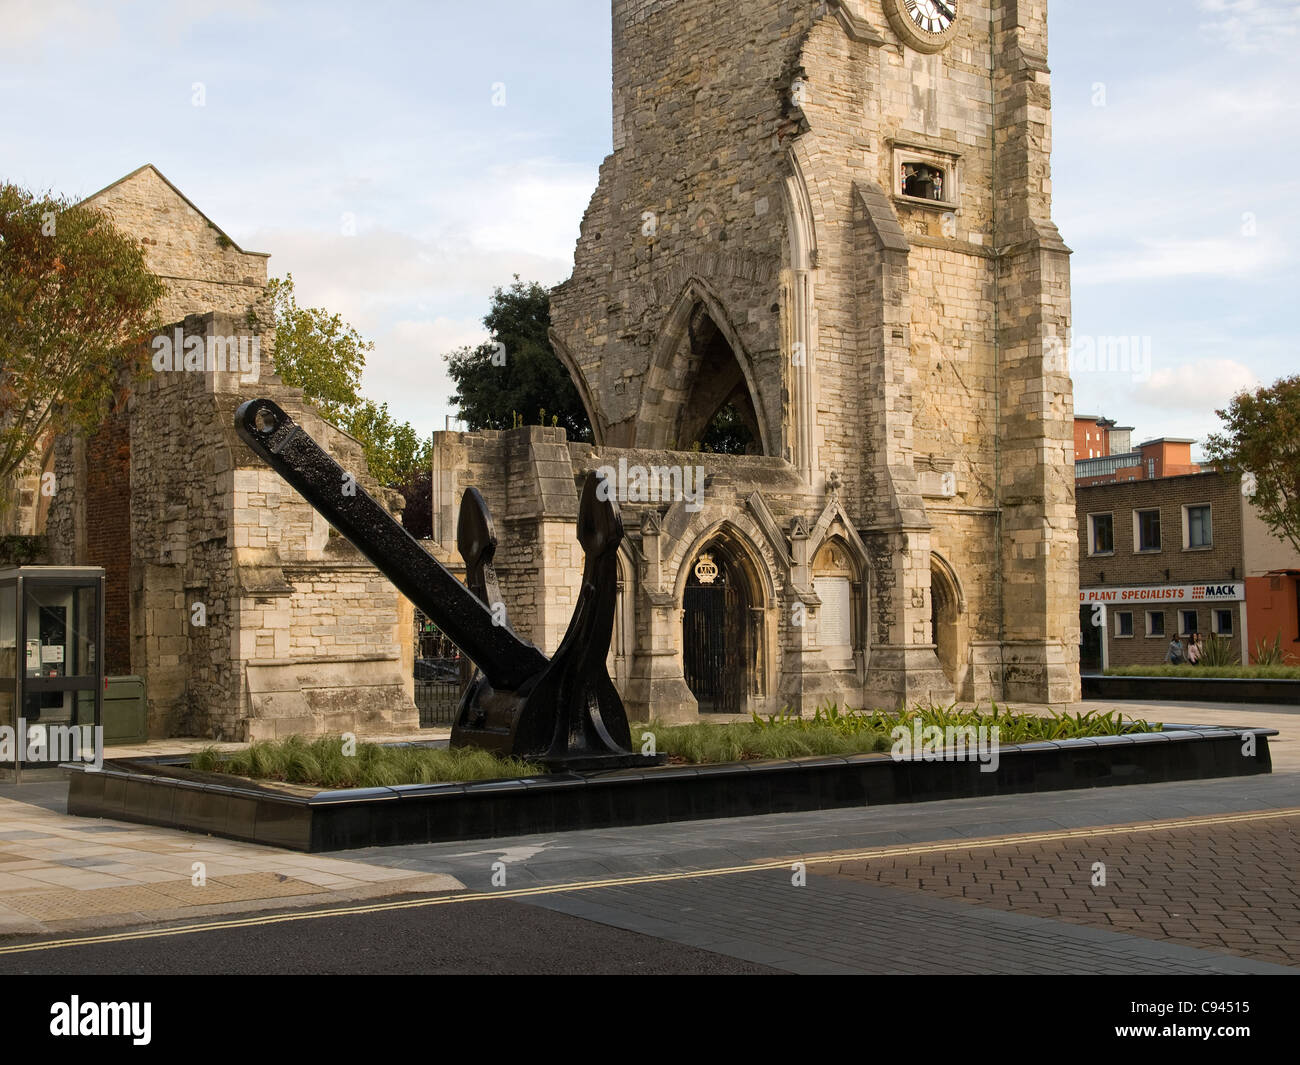 One of the anchors of the QE2 now placed in front of Holy Rood Church as a landmark of Southampton Hampshire England UK Stock Photo